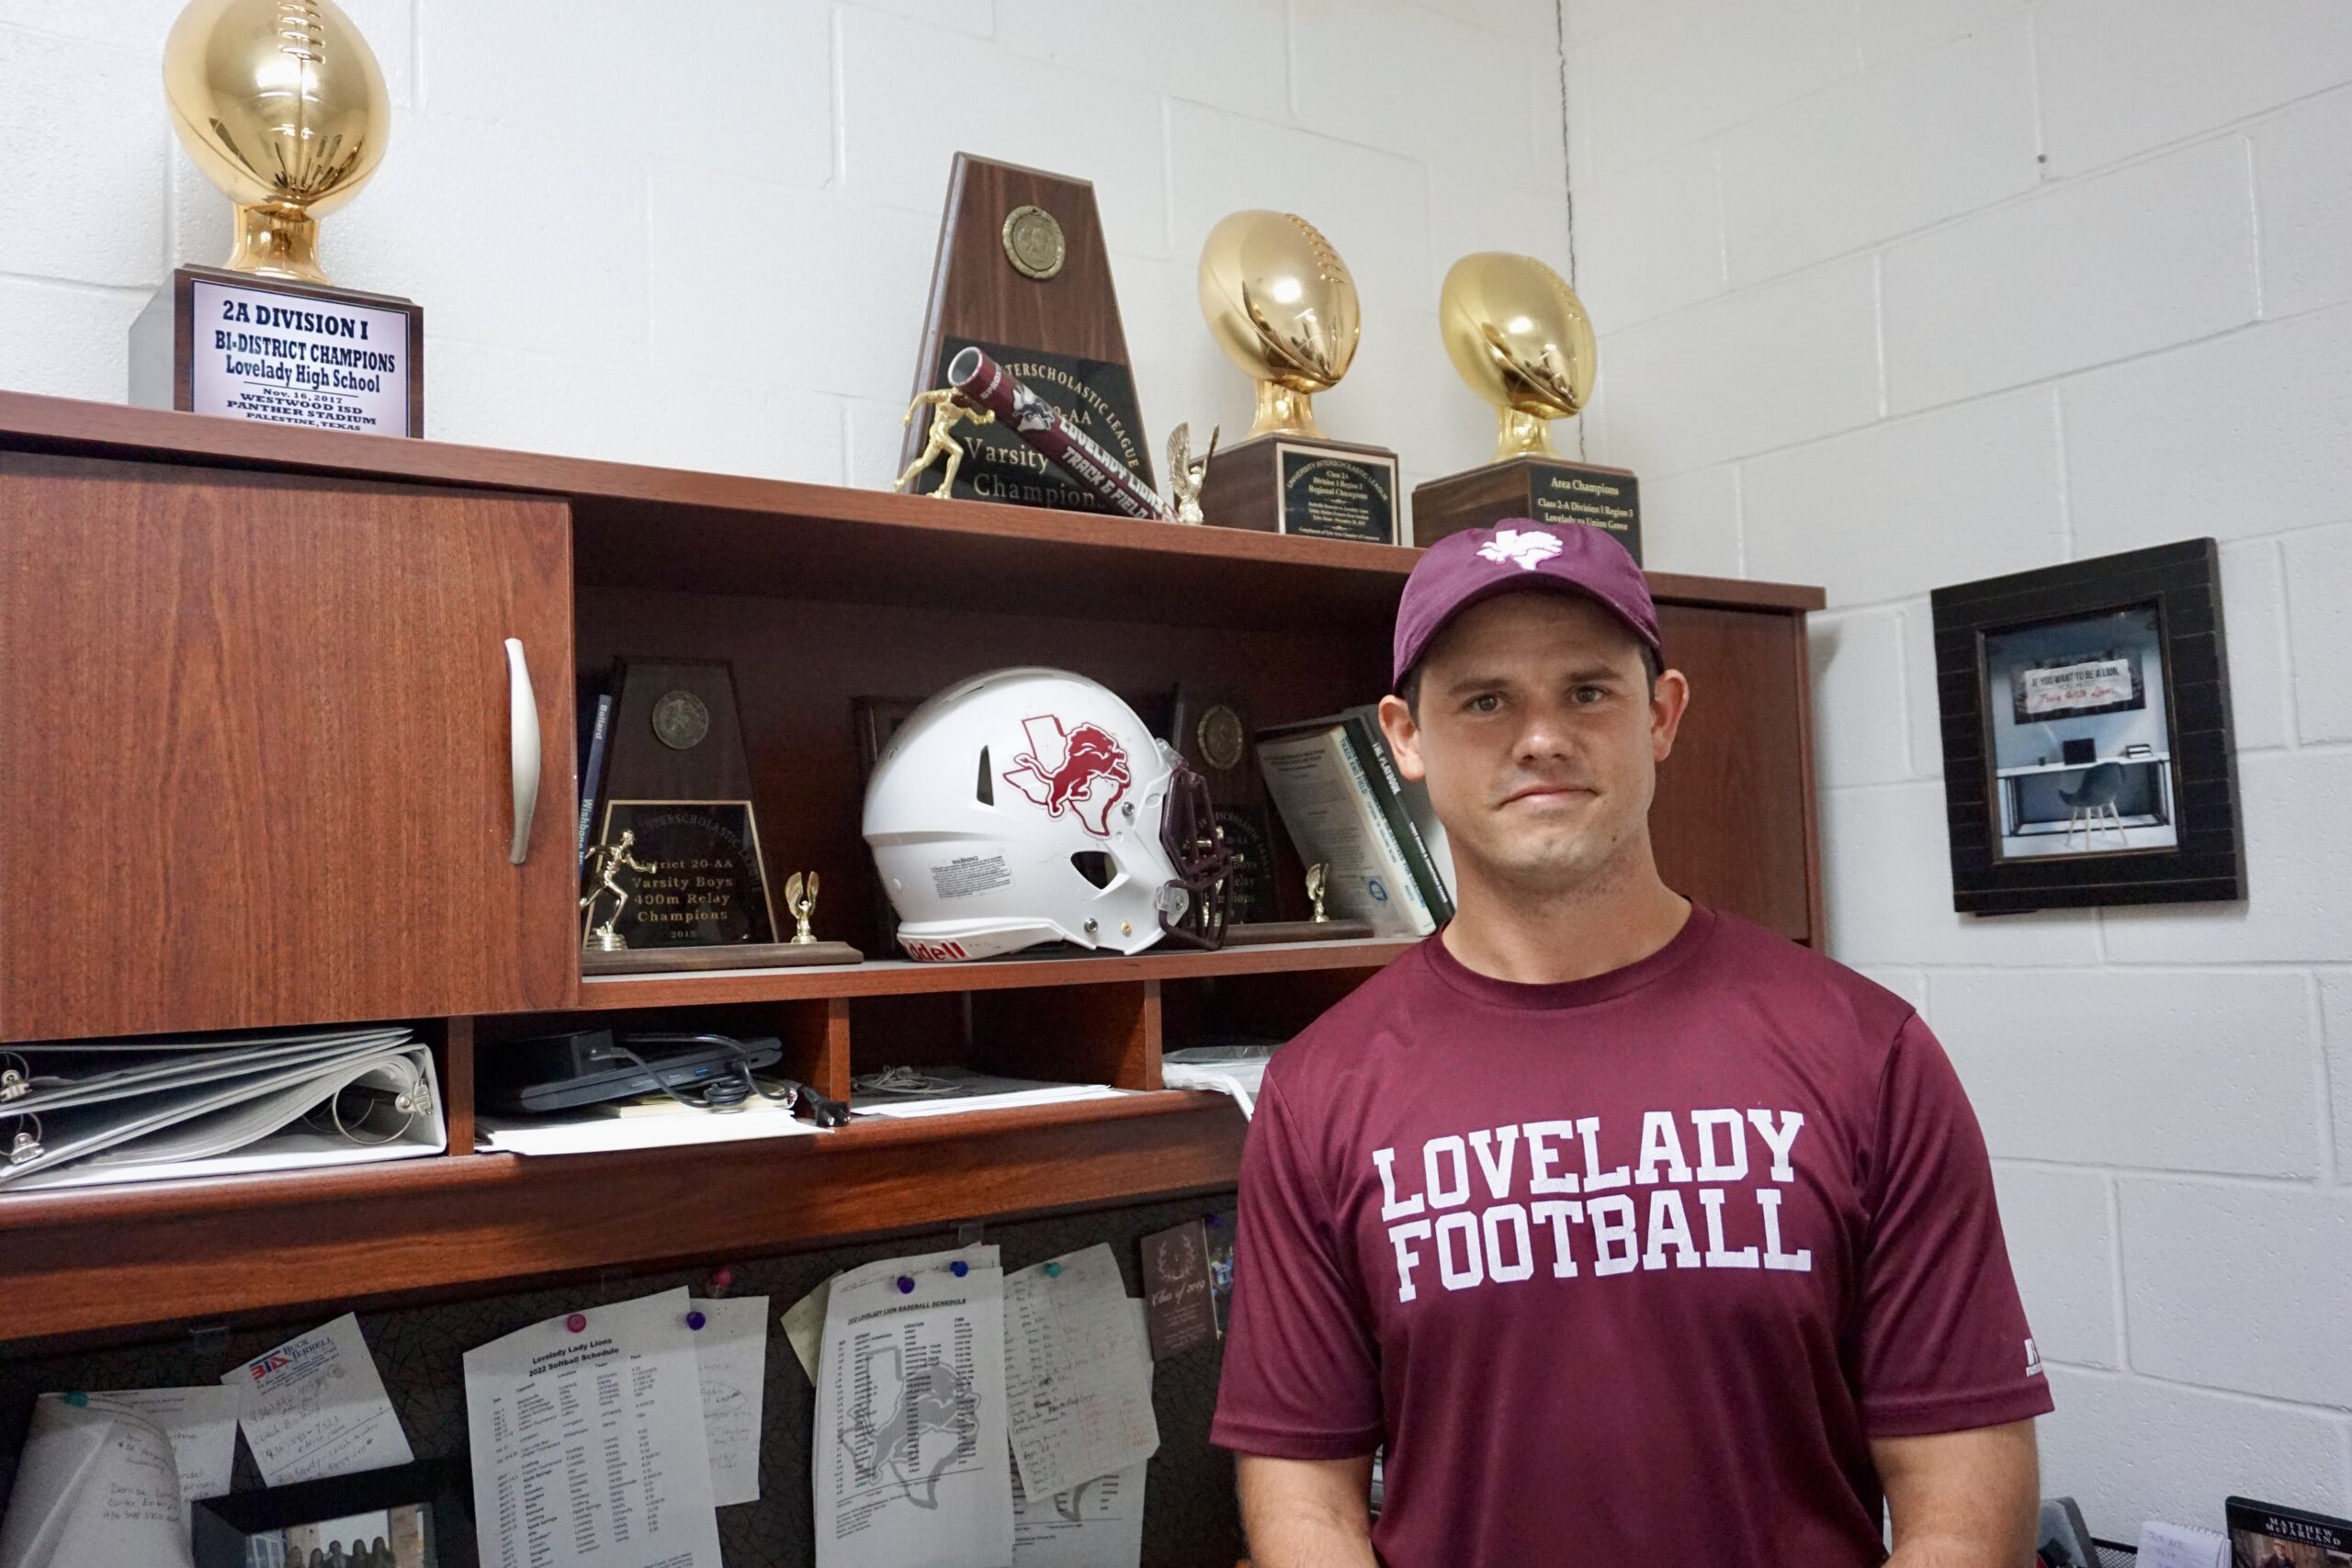   
																For Lovelady Lions Coach “K”, Coaching Runs in the Family 
															 